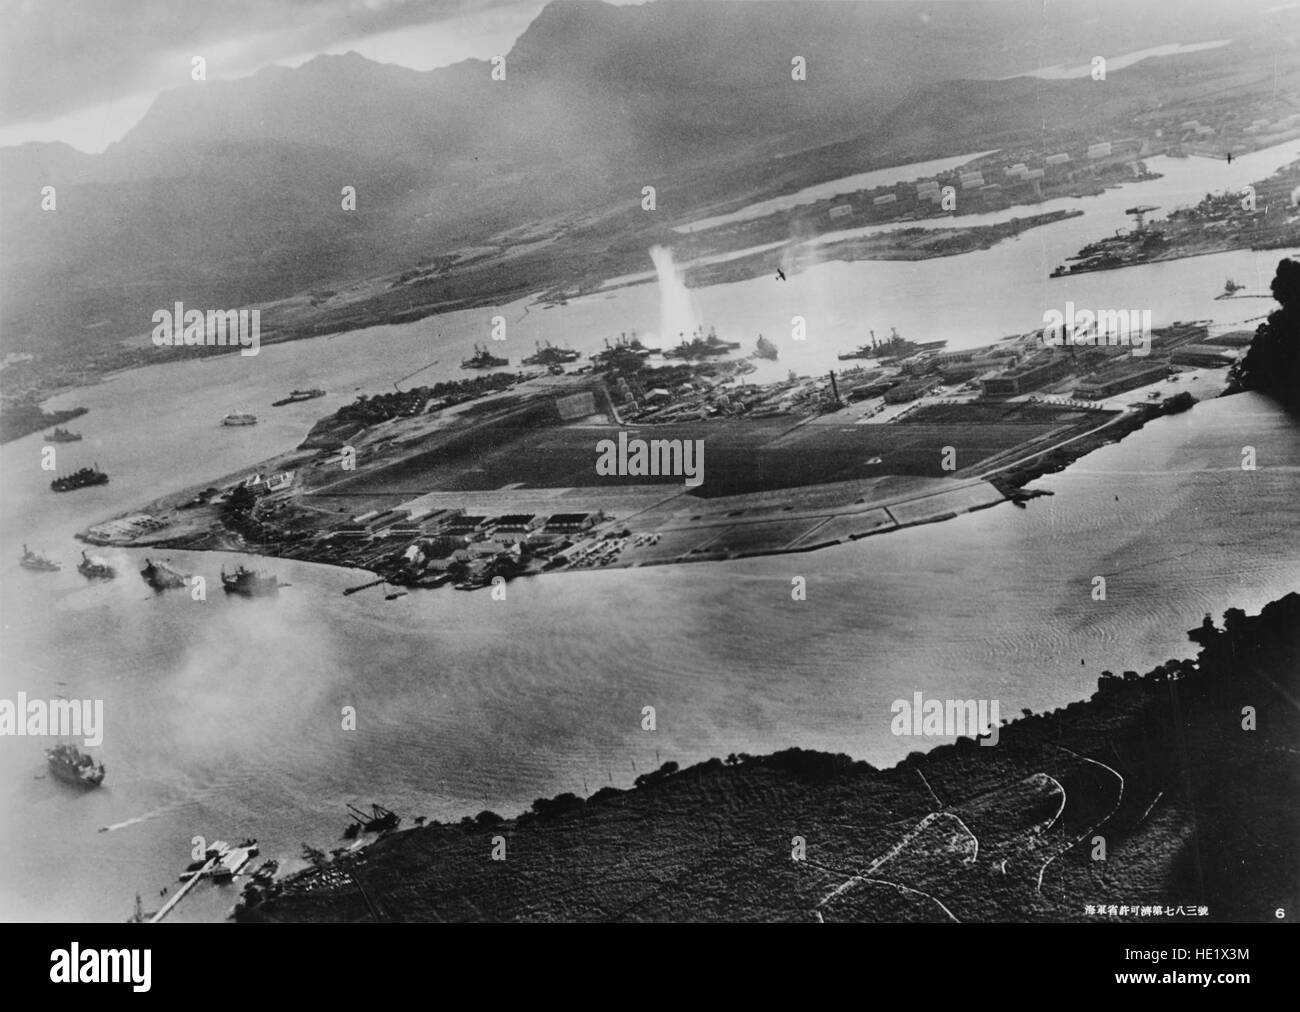 Photograph taken from a Japanese plane during the torpedo attack on ships moored on both sides of Ford Island. View looks about east, with the supply depot, submarine base and fuel tank farm in the right center distance. A torpedo has just hit USS West Virginia on the far side of Ford Island center. Other battleships moored nearby are from left: Nevada, Arizona, Tennessee inboard of West Virginia, Oklahoma torpedoed and listing alongside Maryland, and California. On the near side of Ford Island, to the left, are light cruisers Detroit and Raleigh, target and training ship Utah and seaplane ten Stock Photo